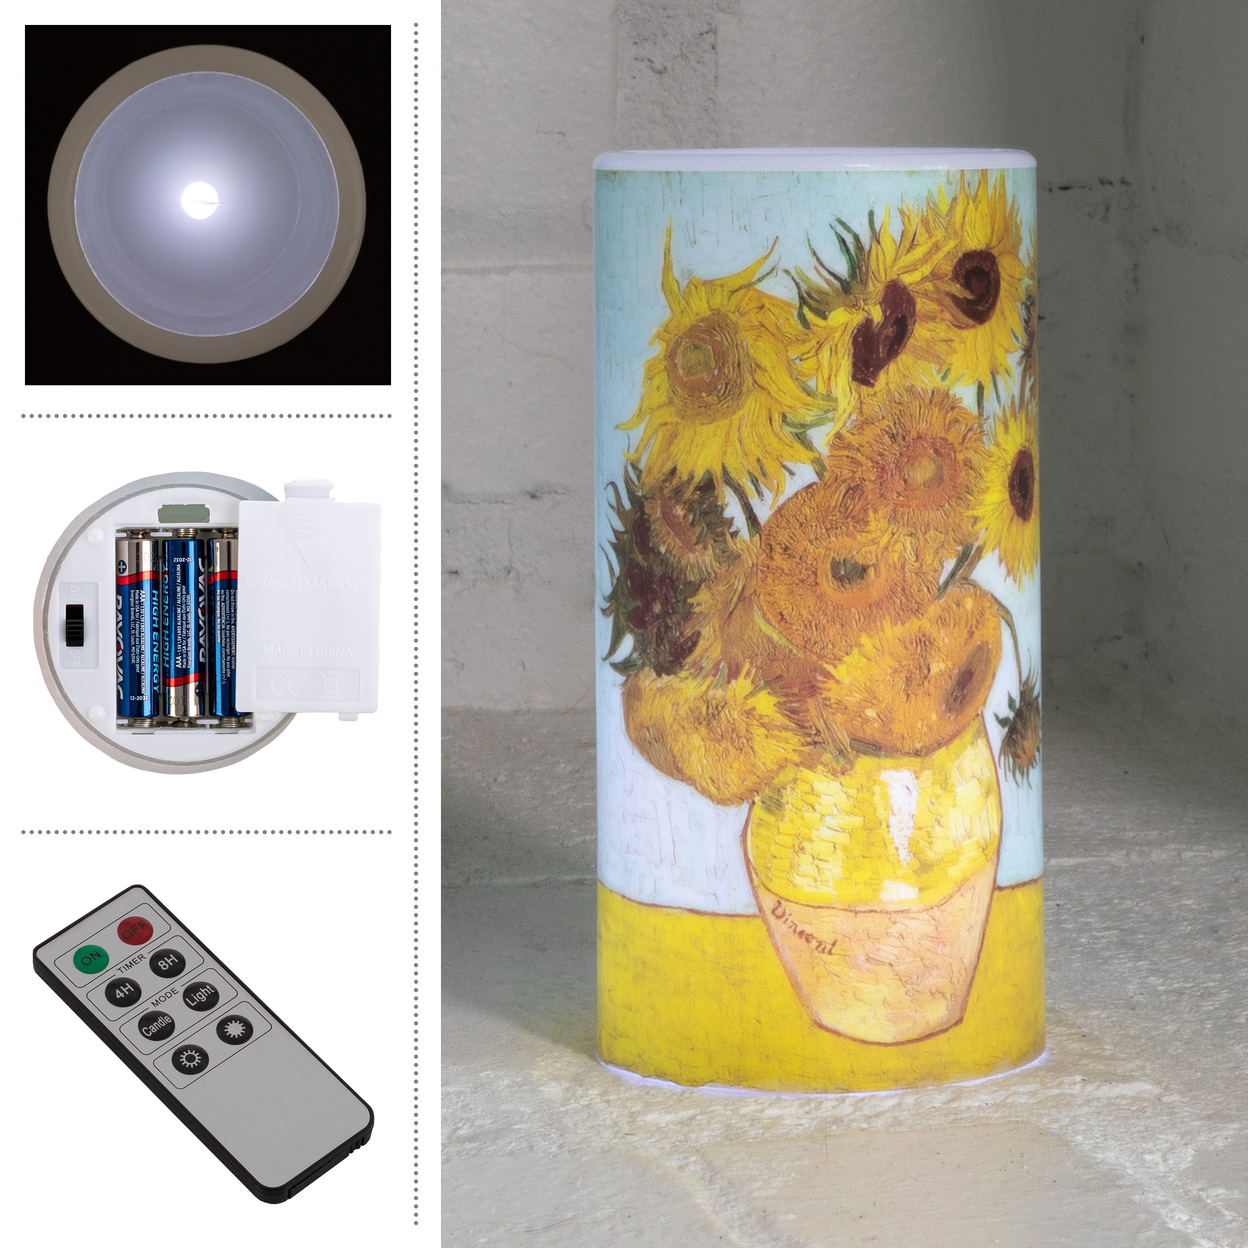 LED Candle With Remote Battery Operated Flameless Candles Sunflower